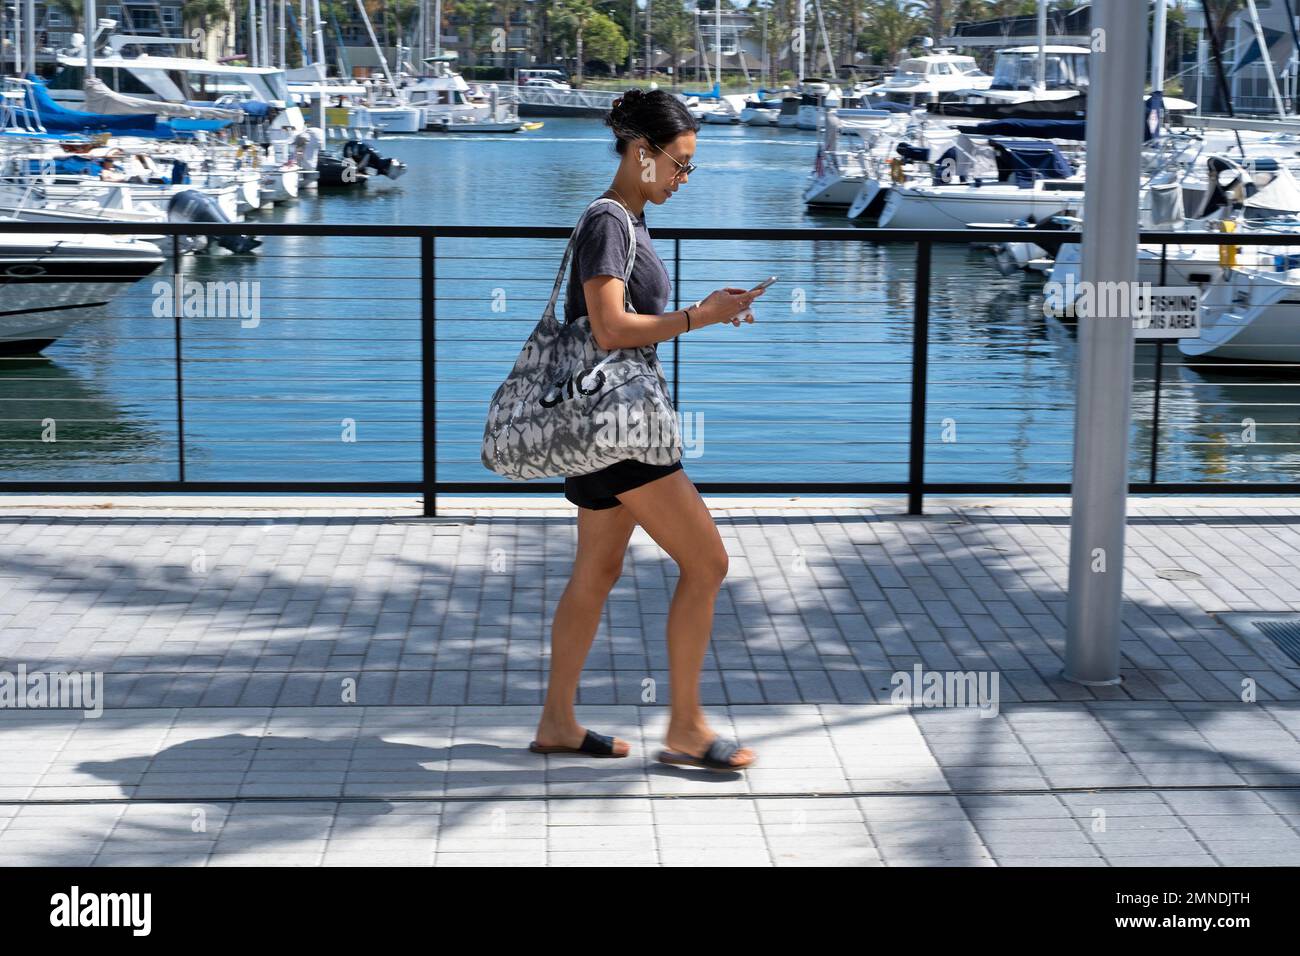 A woman looks at her phone while walking in Marina Del Rey, California, USA. Stock Photo